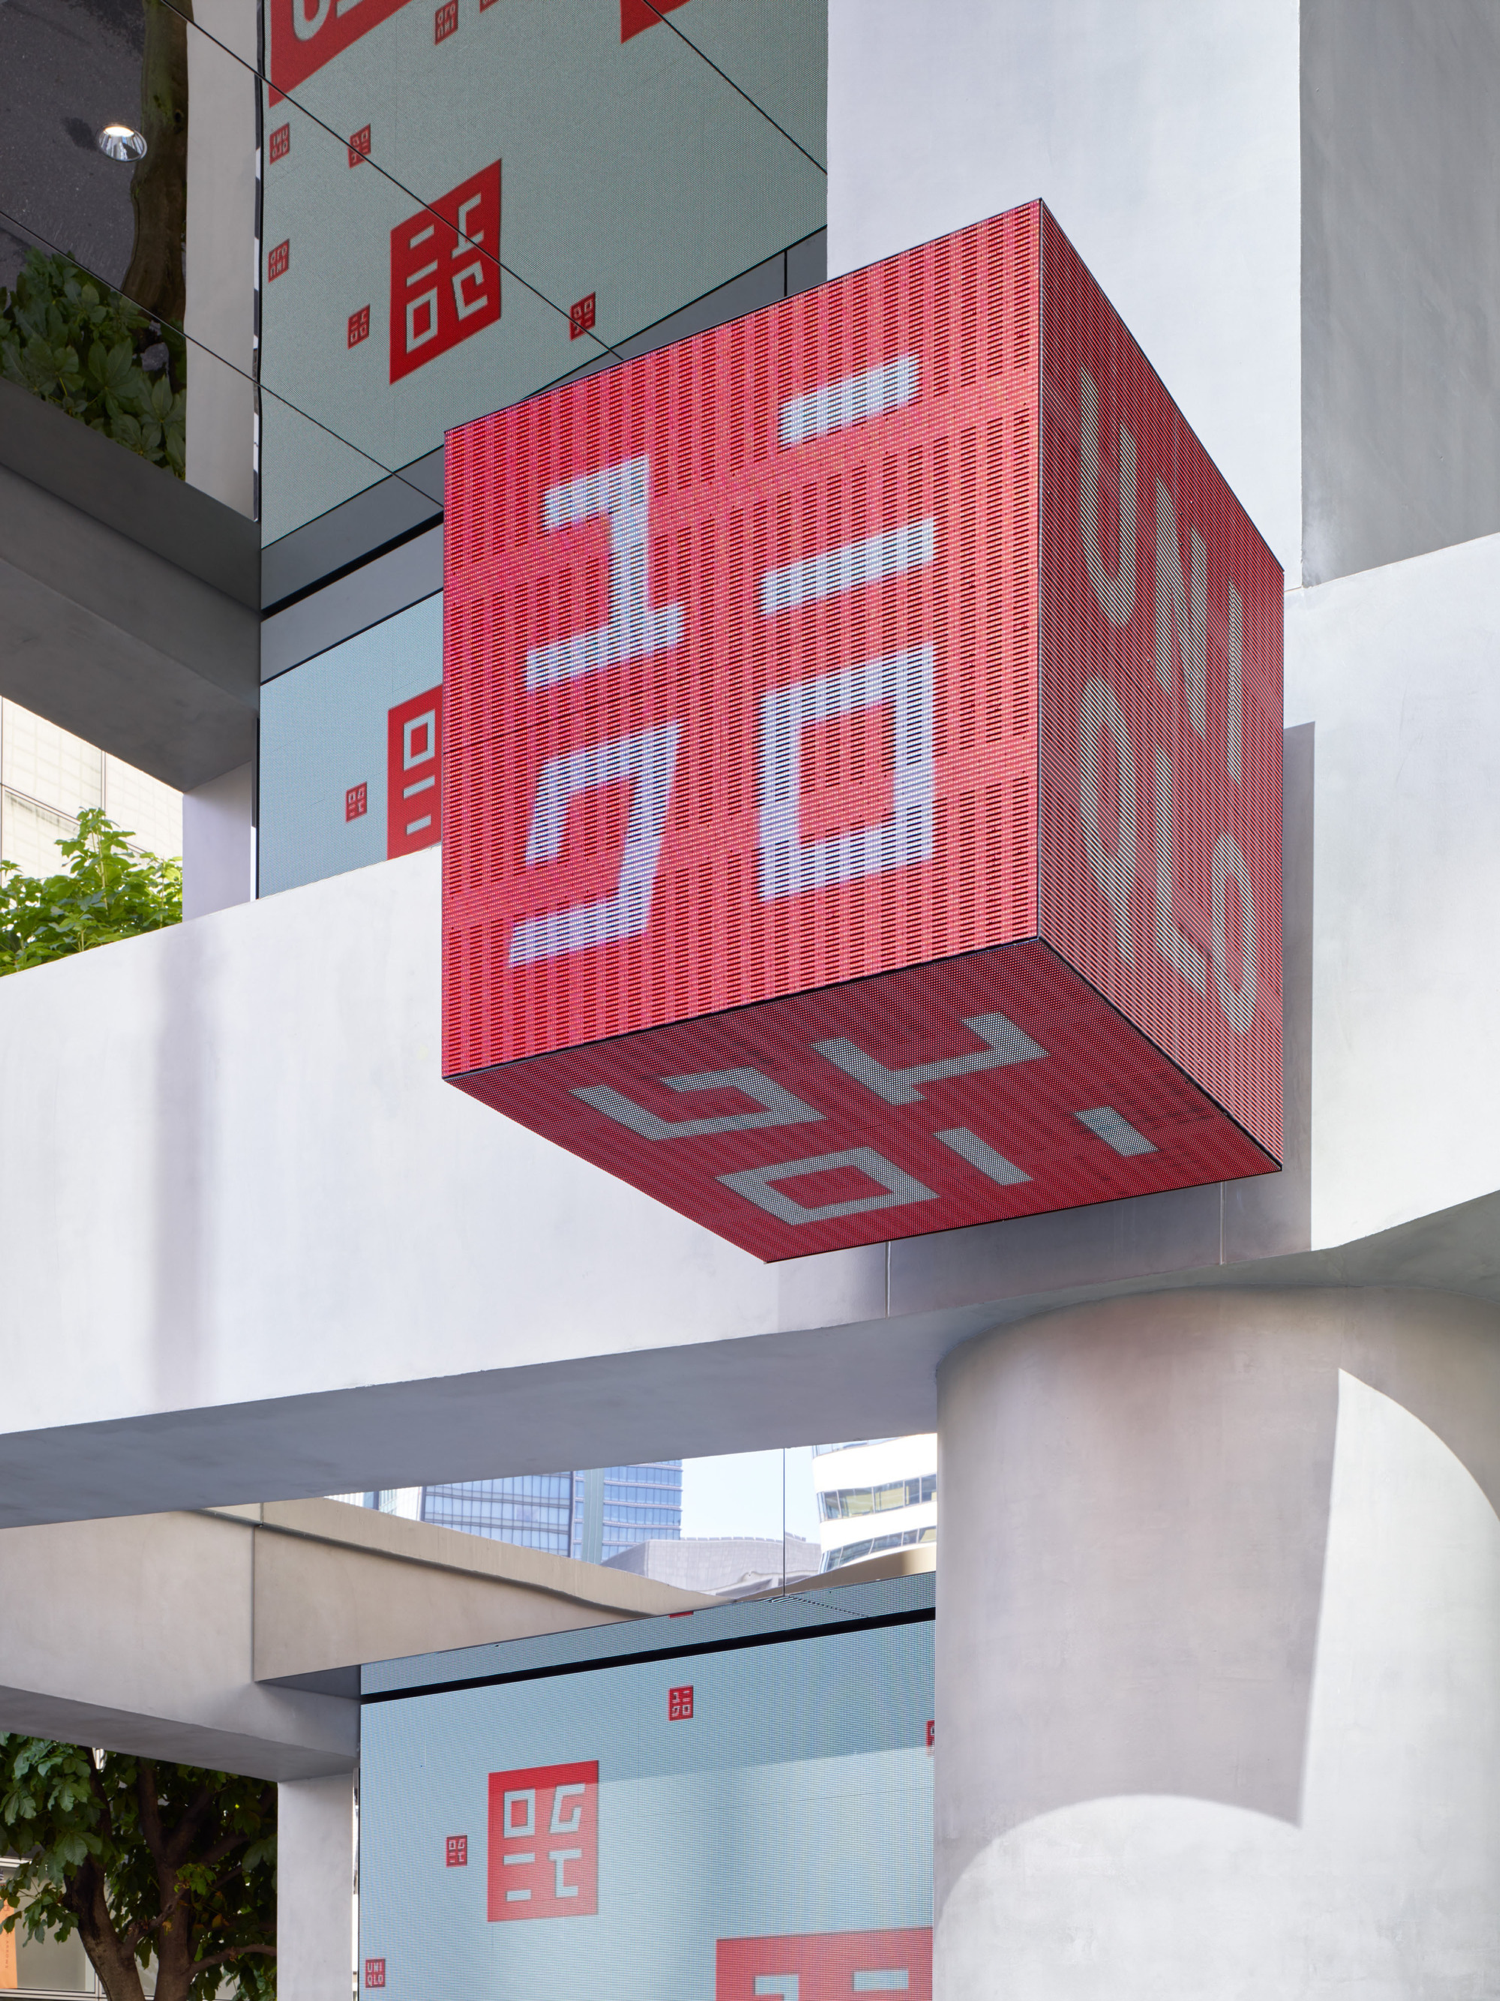 The newly renovated Uniqlo Ginza flagship store will have a café